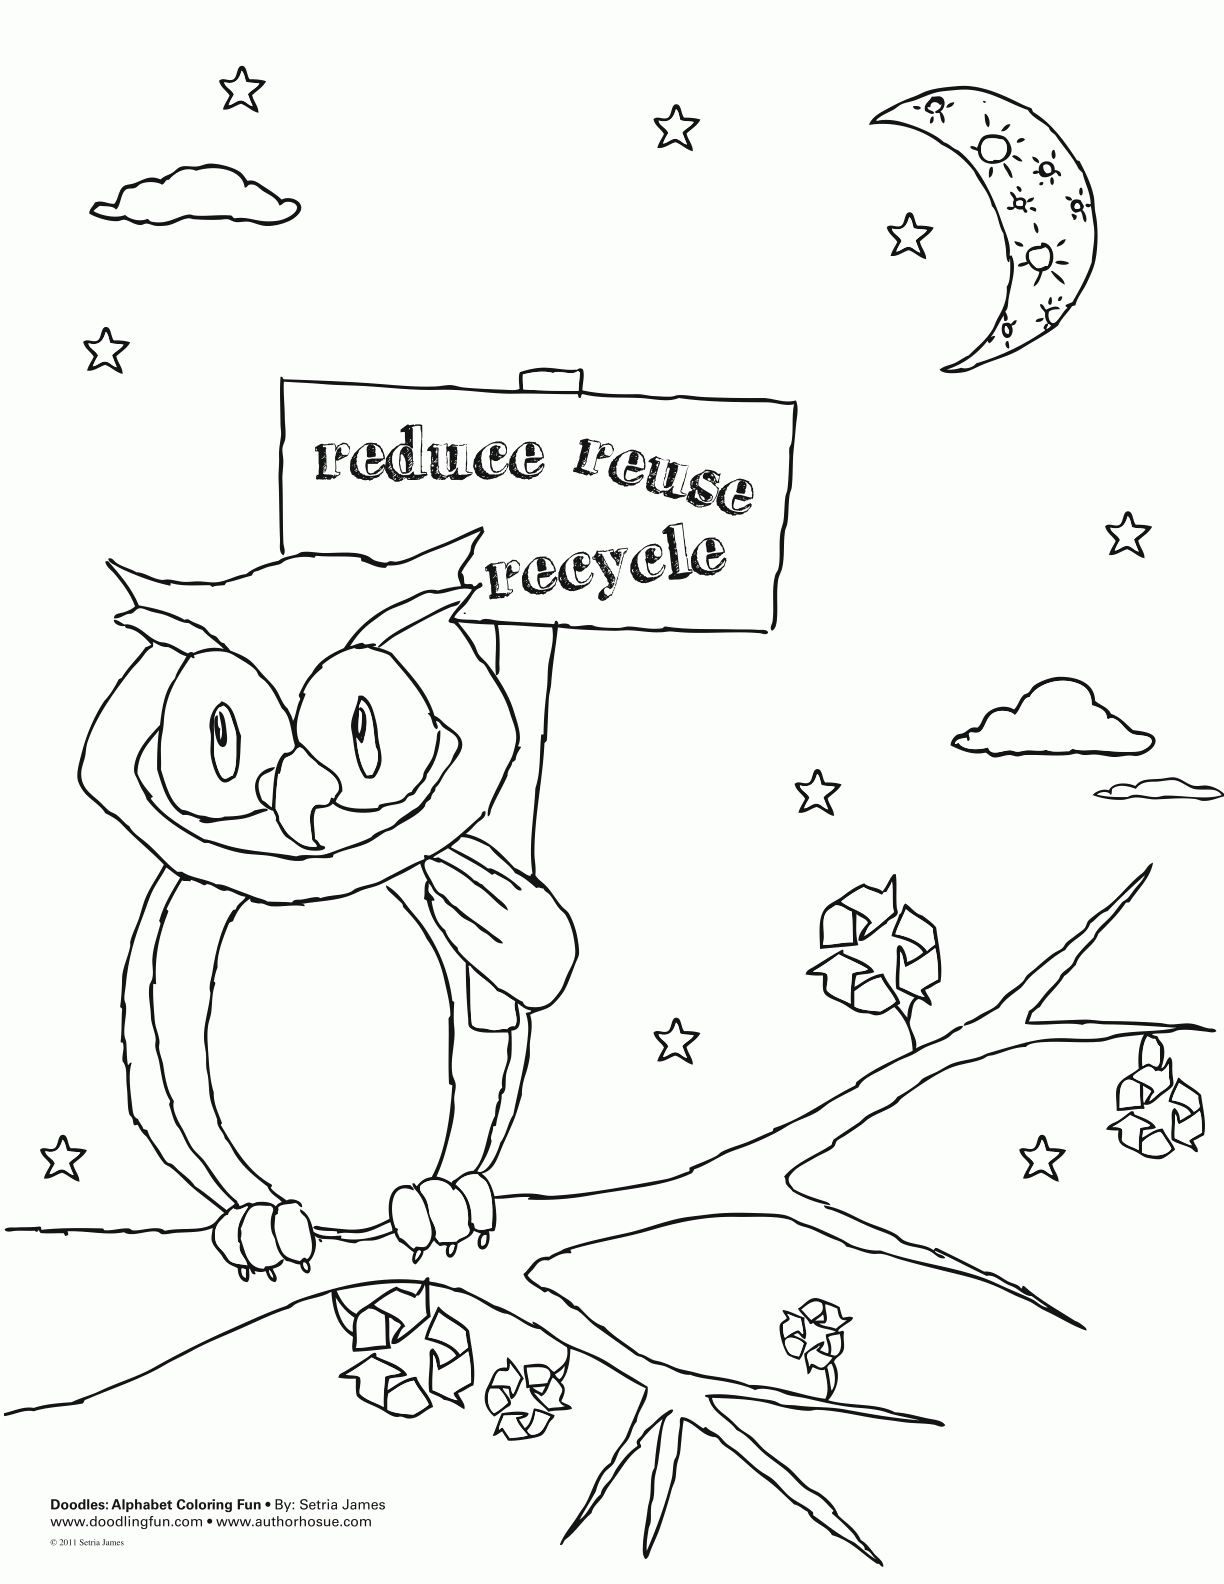 Download Recycling Coloring Pages For Kids - Coloring Home